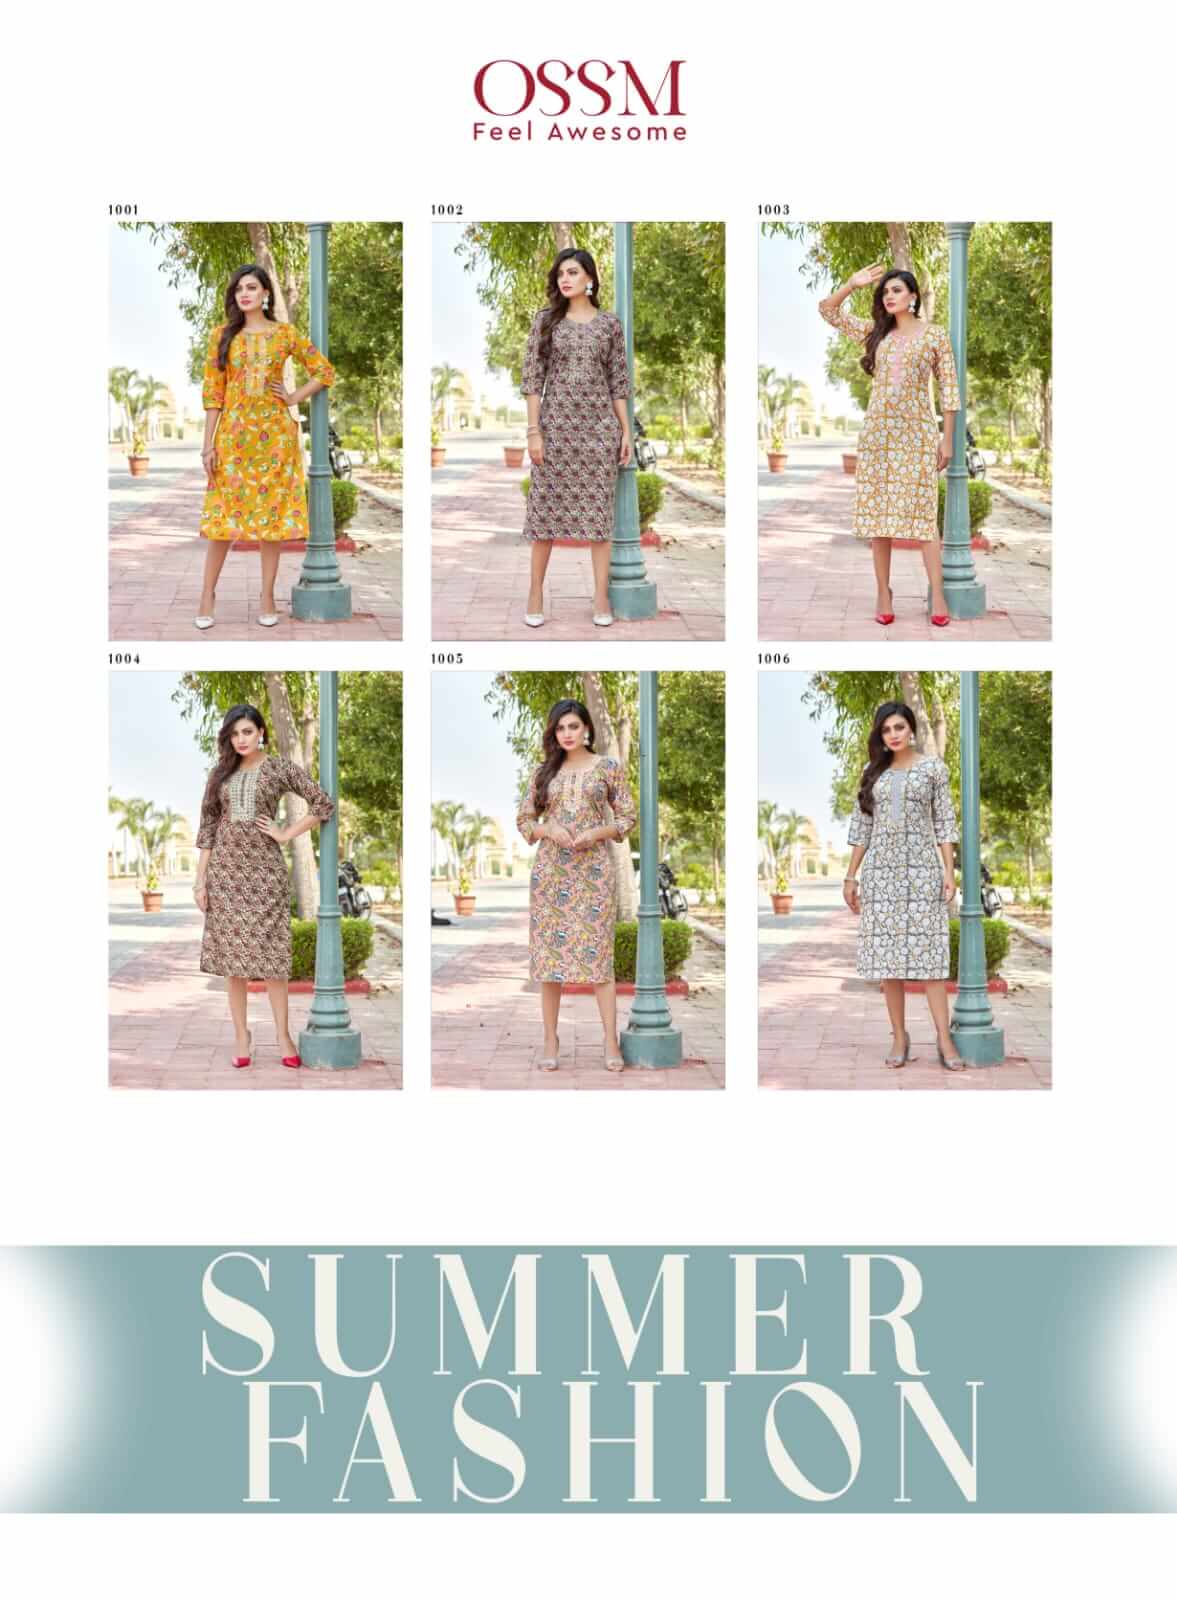 Ossm Summer Fashion collection 1